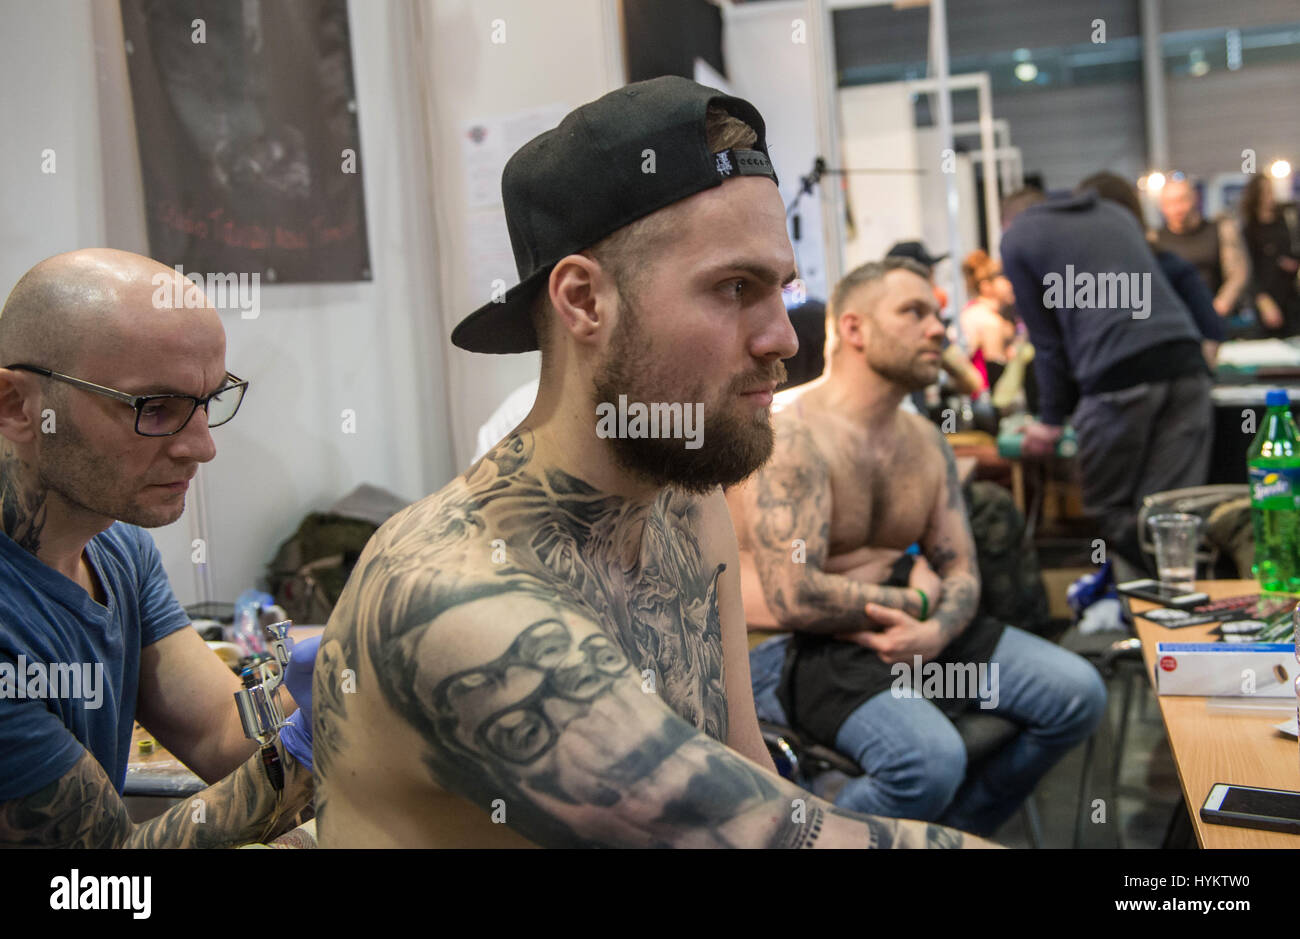 Top 5 Most Popular Masculine Tattoo Designs for Men  by Celebrity Ink  Tattoo Studio Southport  Medium